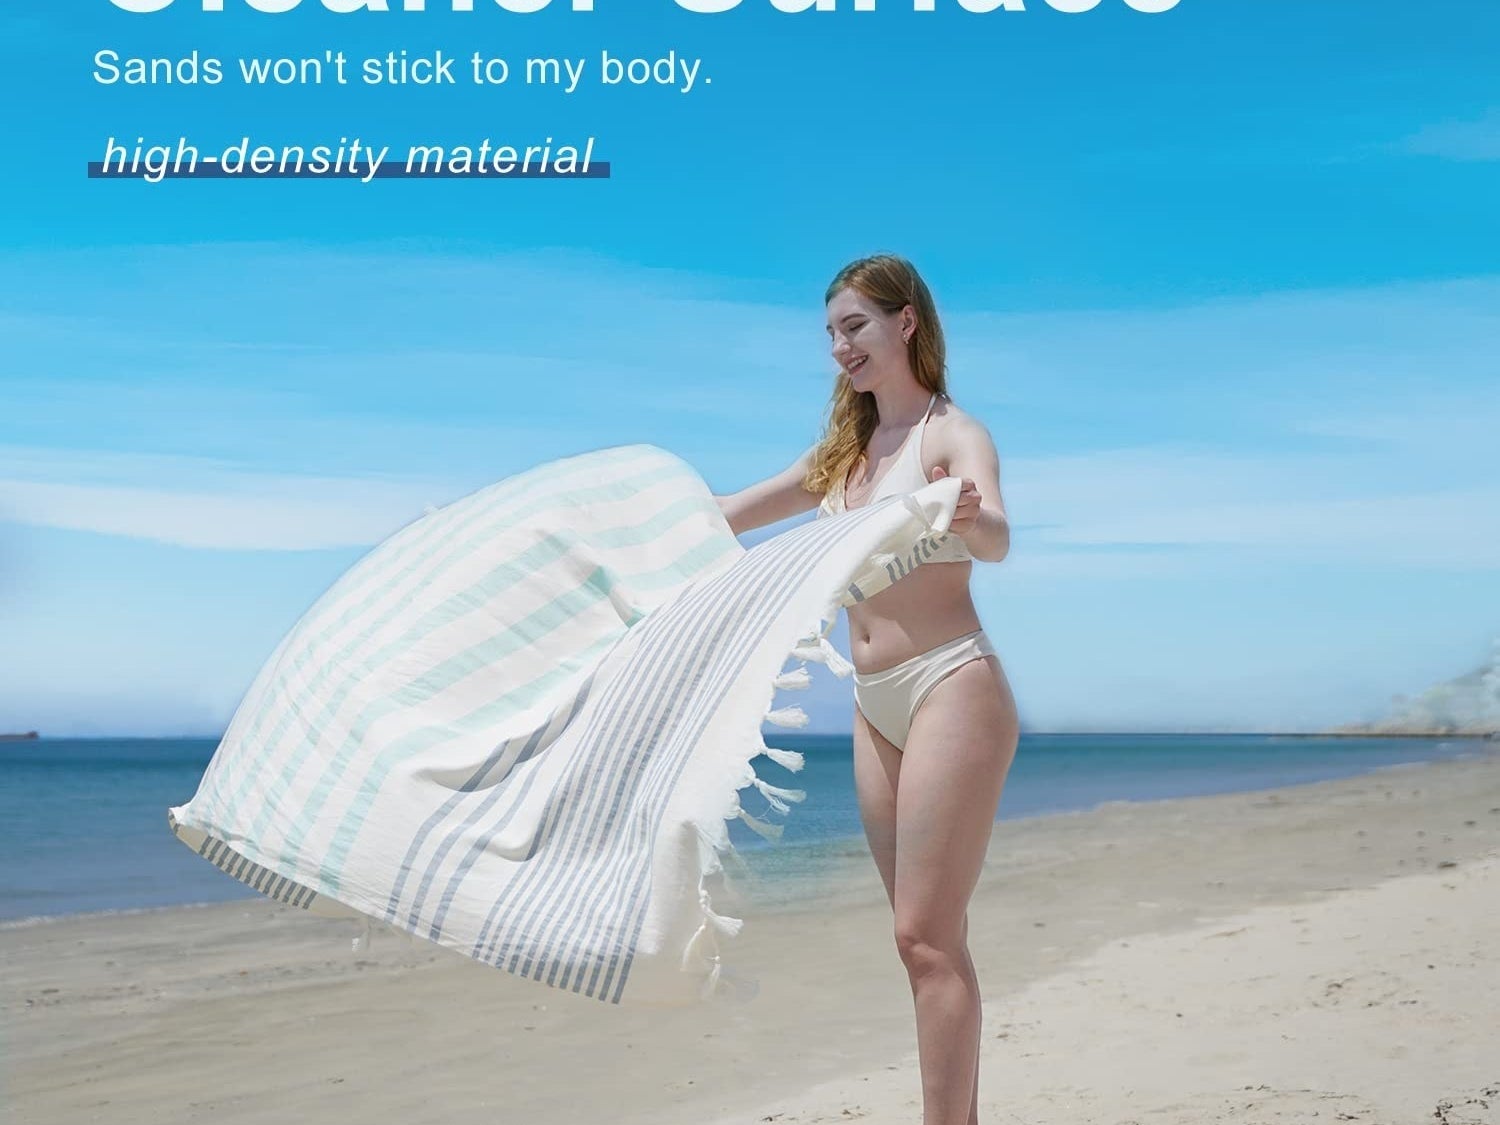 Model laying the beach towel out onto a beach